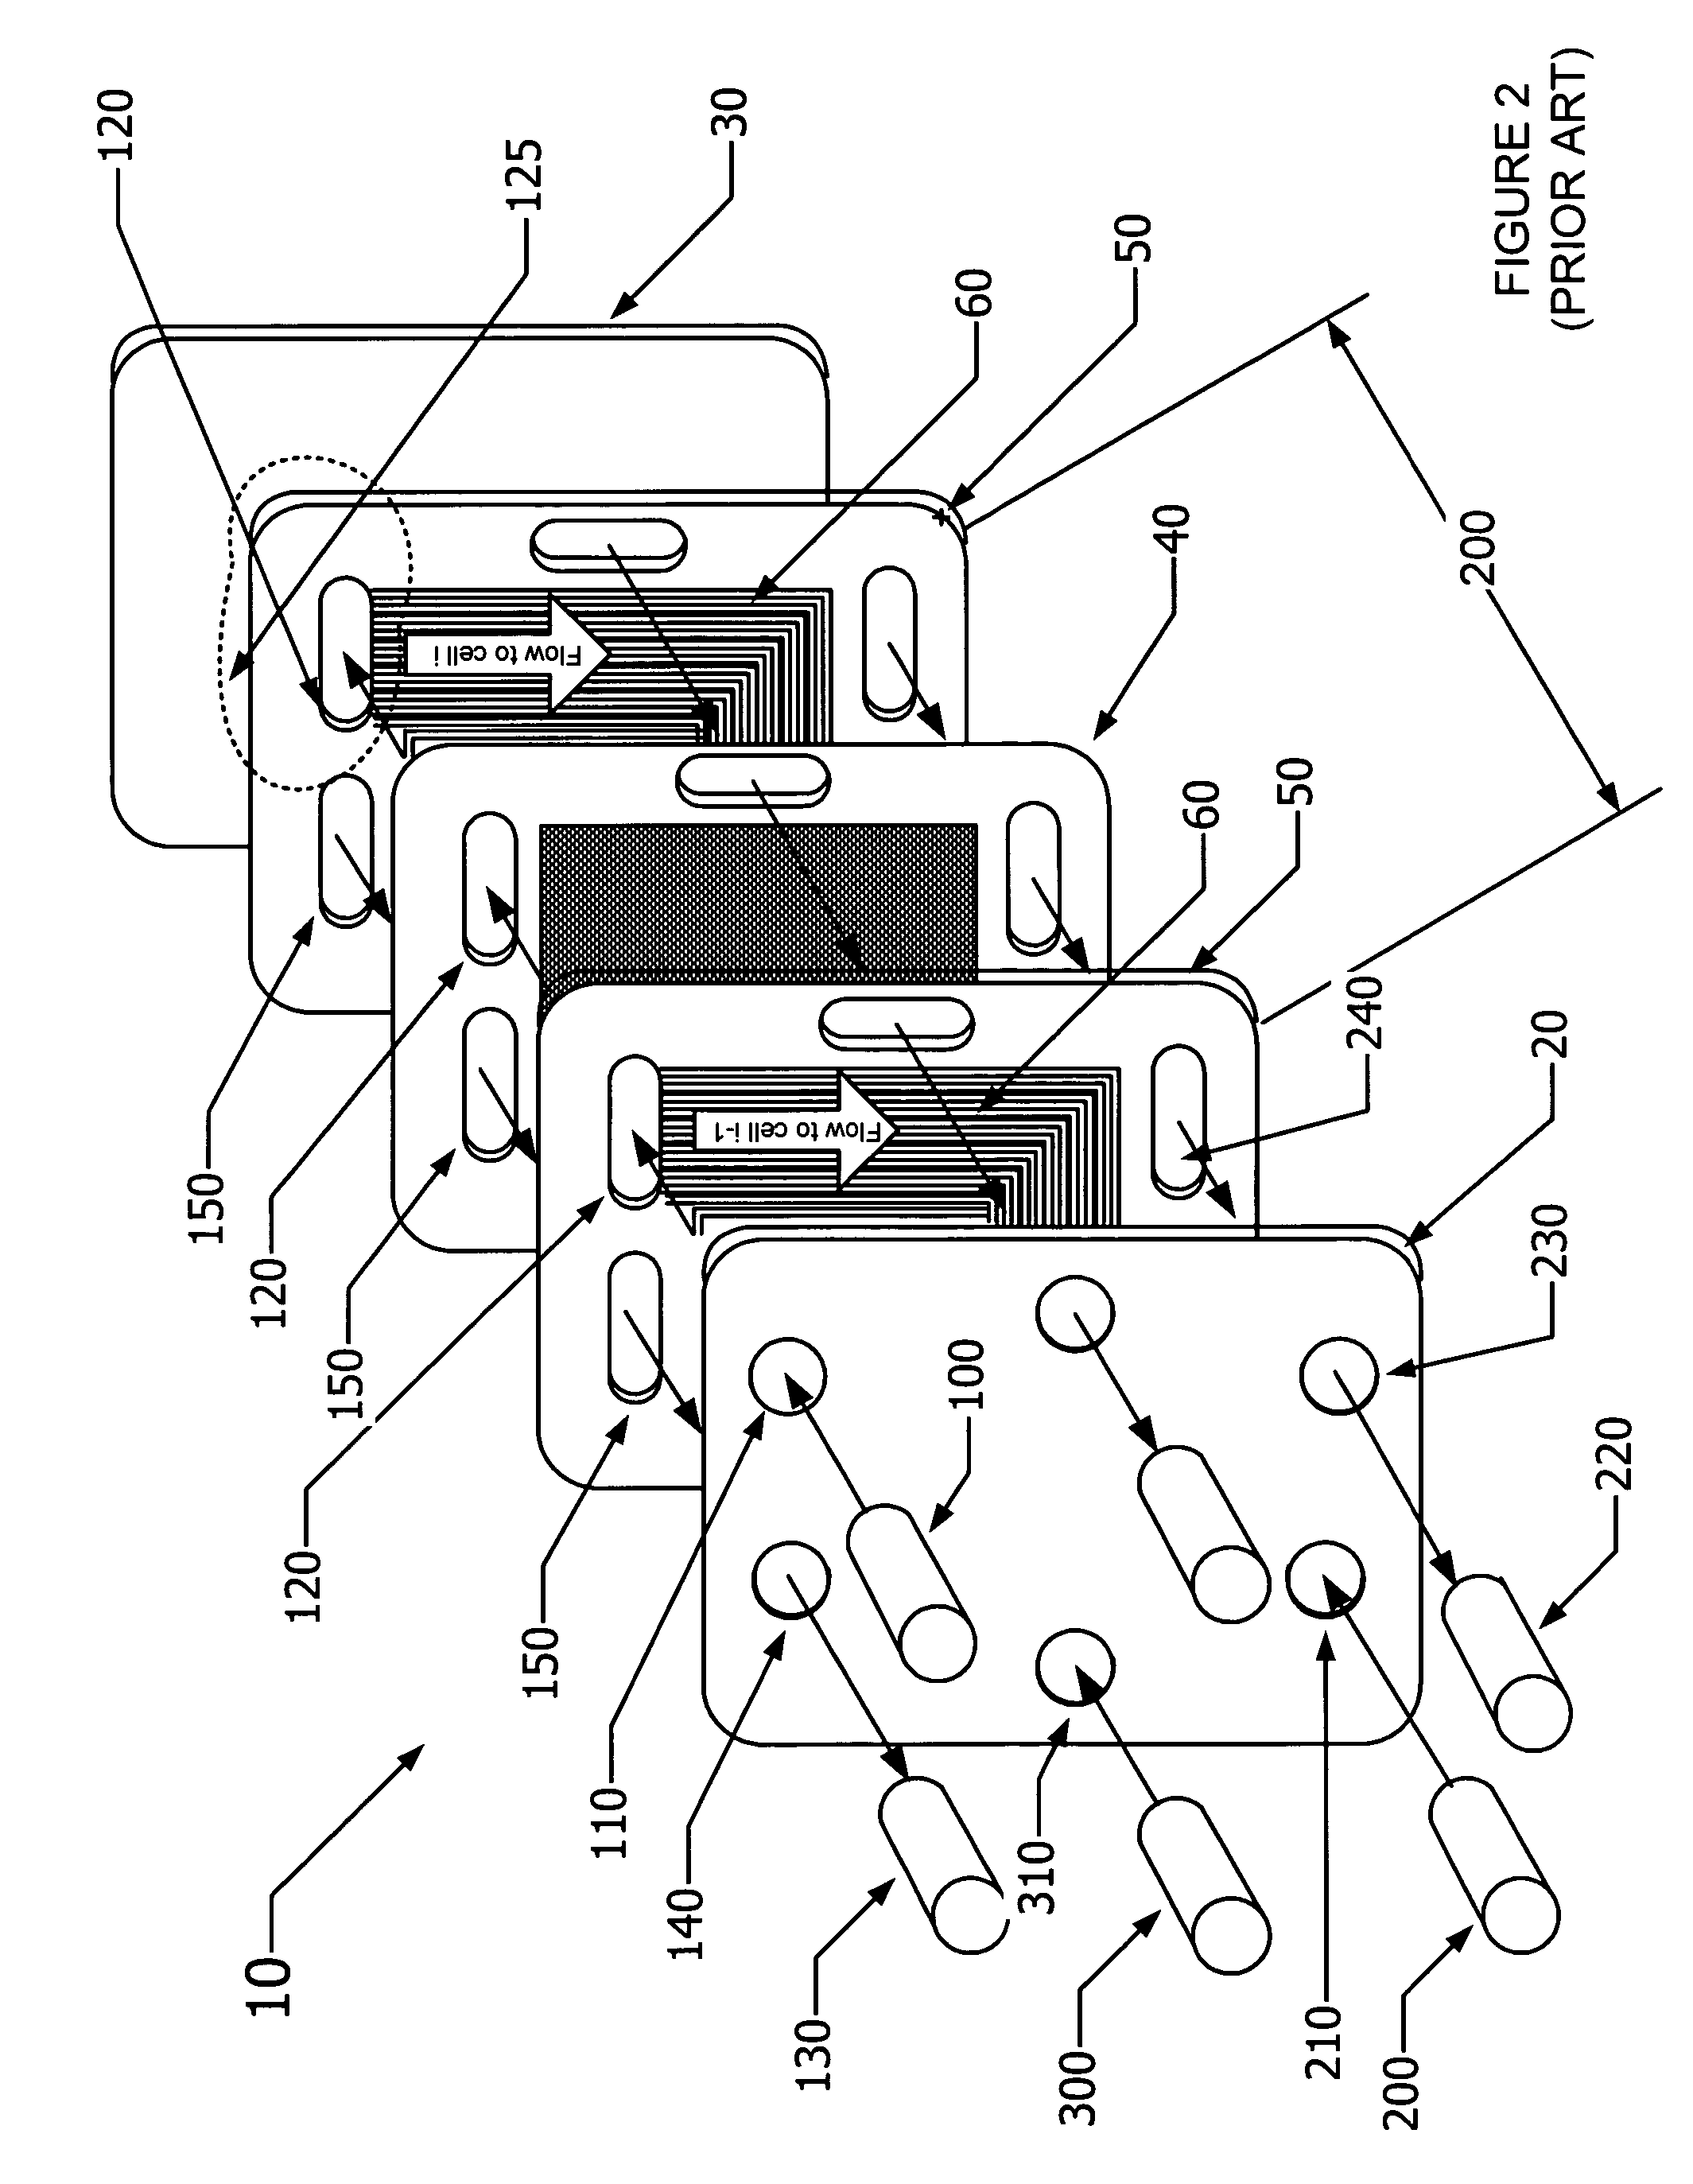 Fuel cell stack with even distributing gas manifolds